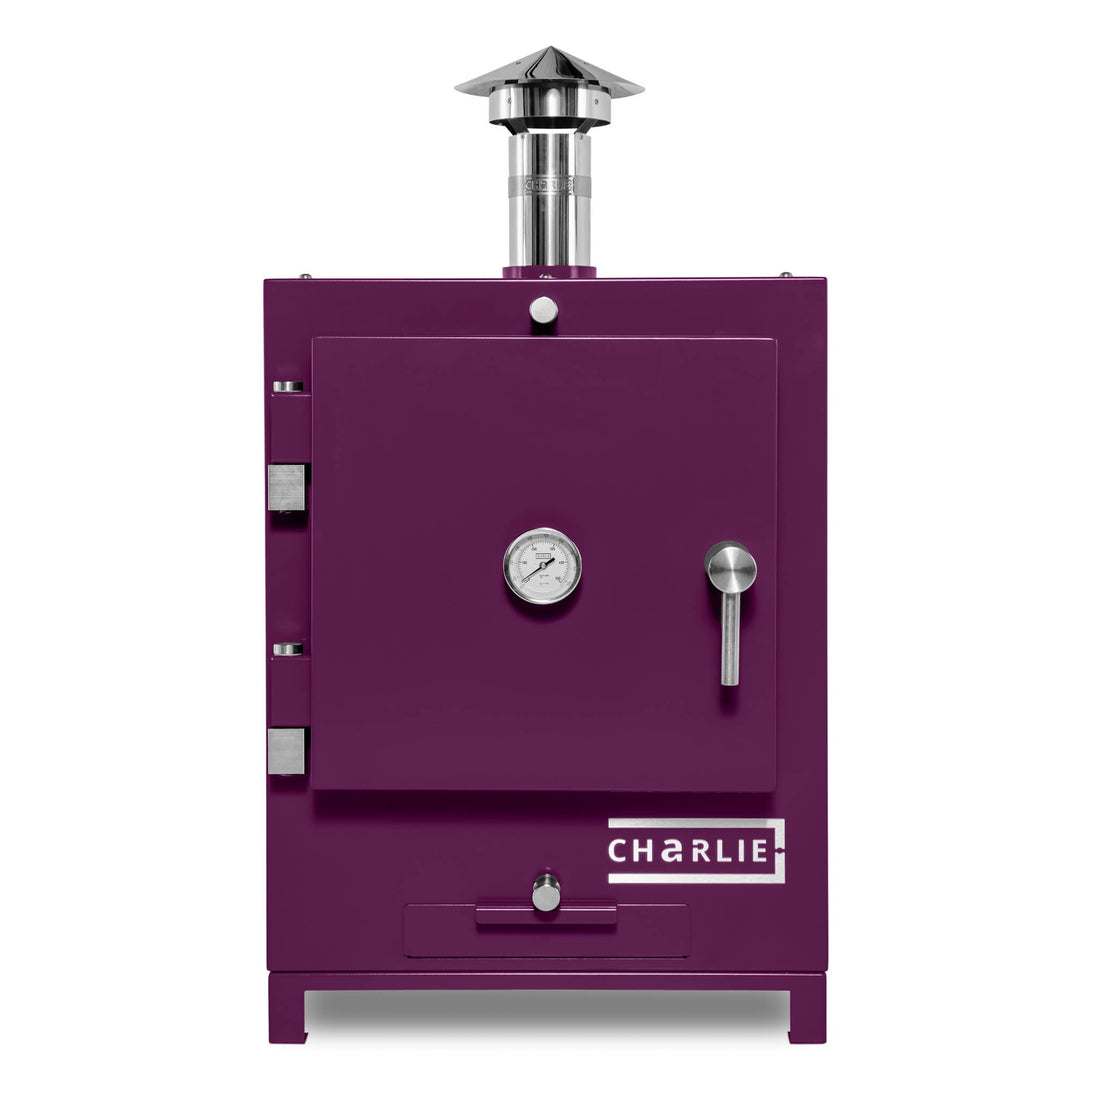 Cheeky Charlie Charcoal Tabletop Oven - Beetroot - Charlie Oven